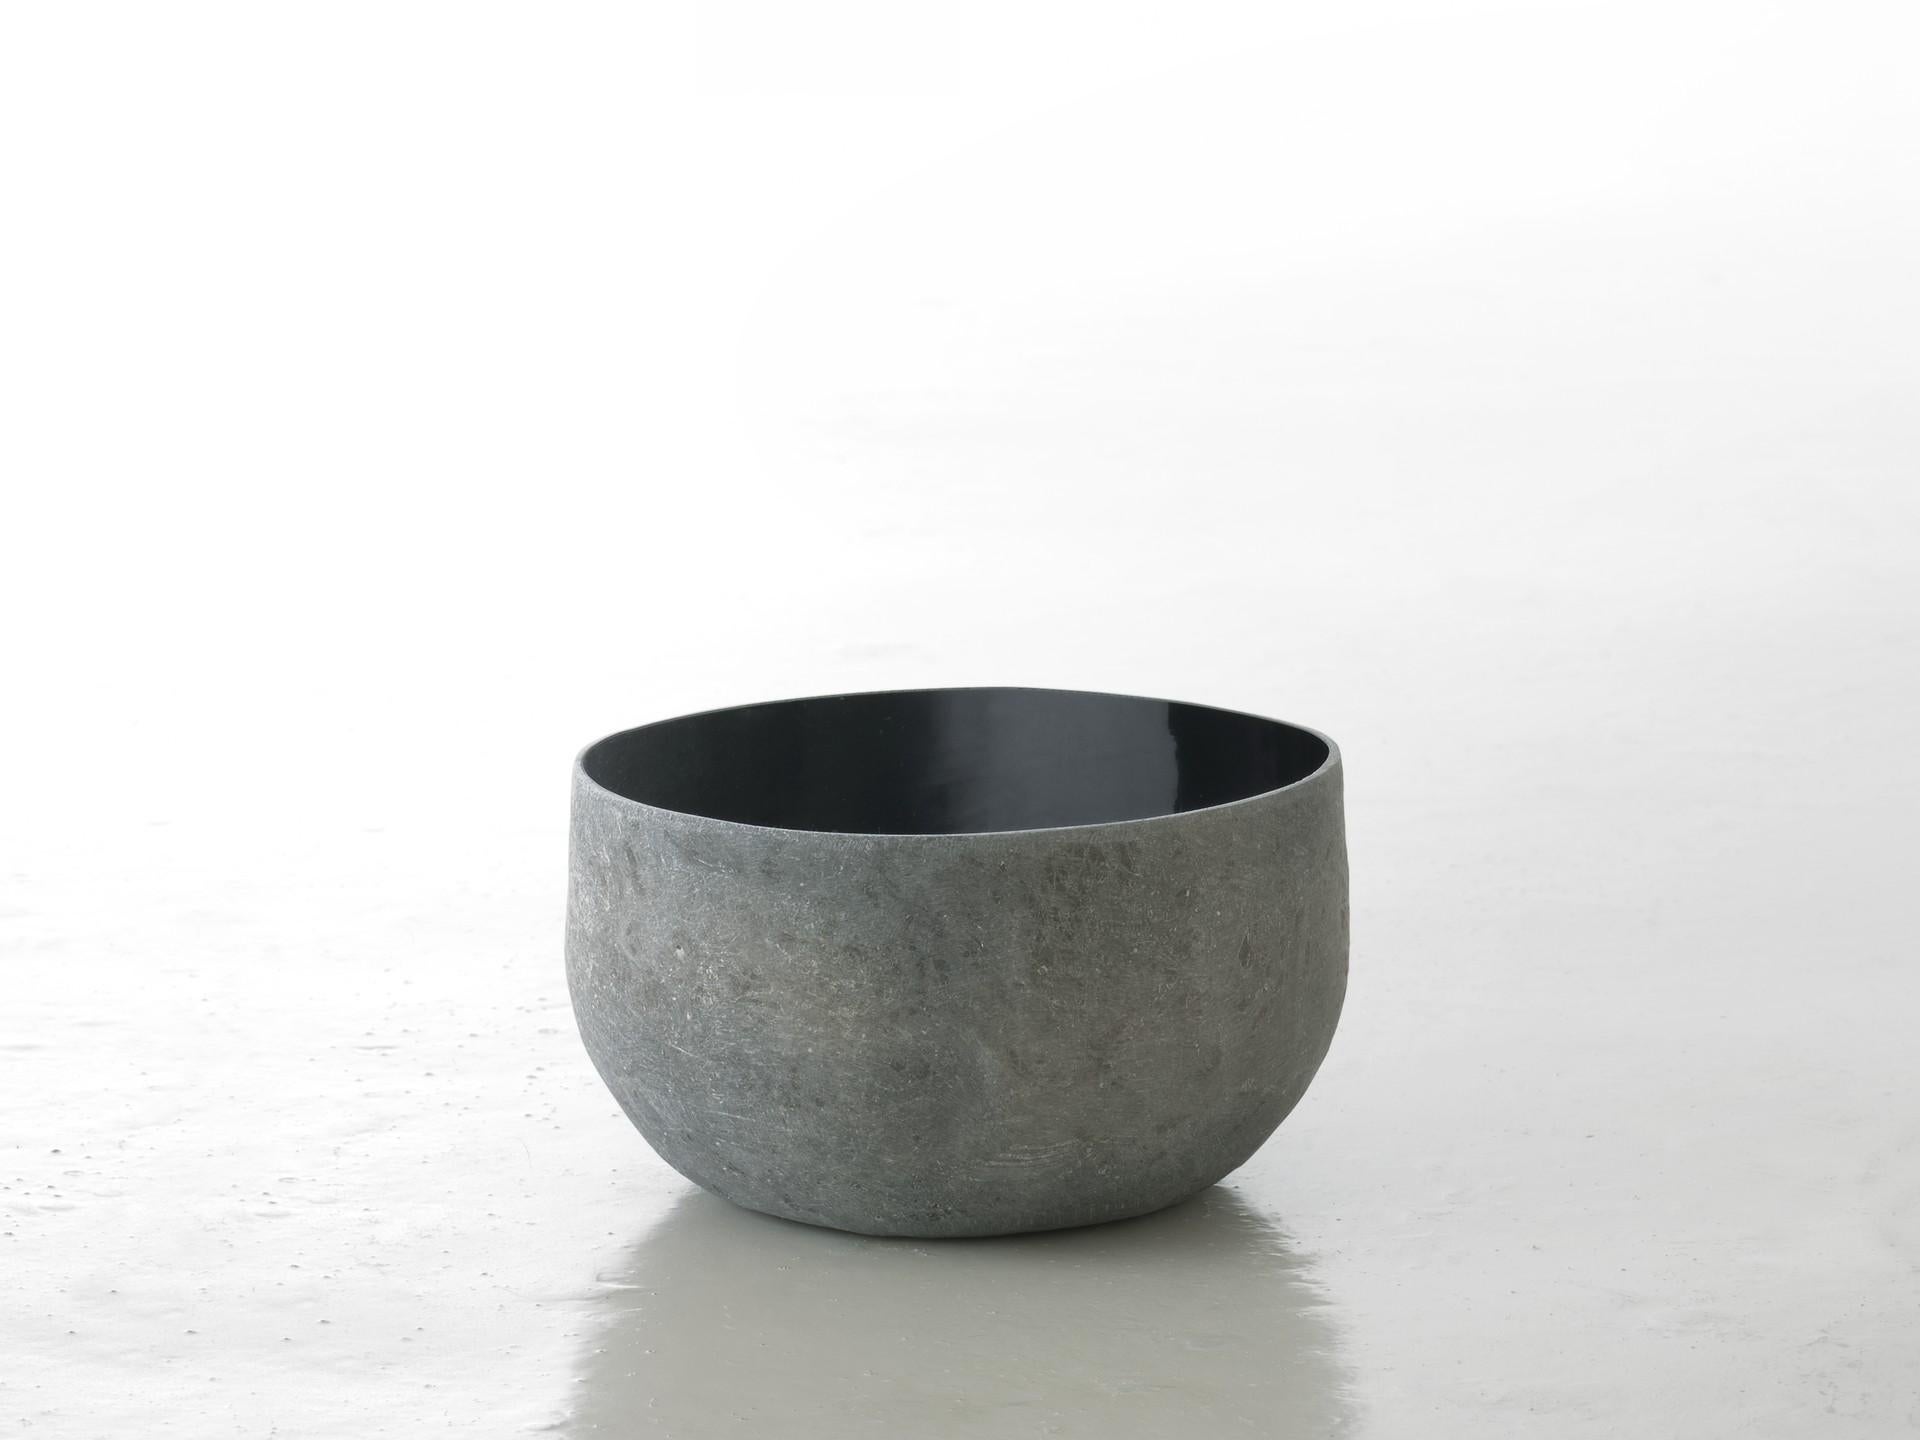 Esopo Bowl by Imperfettolab
Dimensions: Ø 20 x H 10 cm
Materials: Raw material


Imperfetto Lab
Who we are ? We are a family.
Verter Turroni, Emanuela Ravelli and our children Elia, Margherita and Eusebio.
All together, we are separate parts